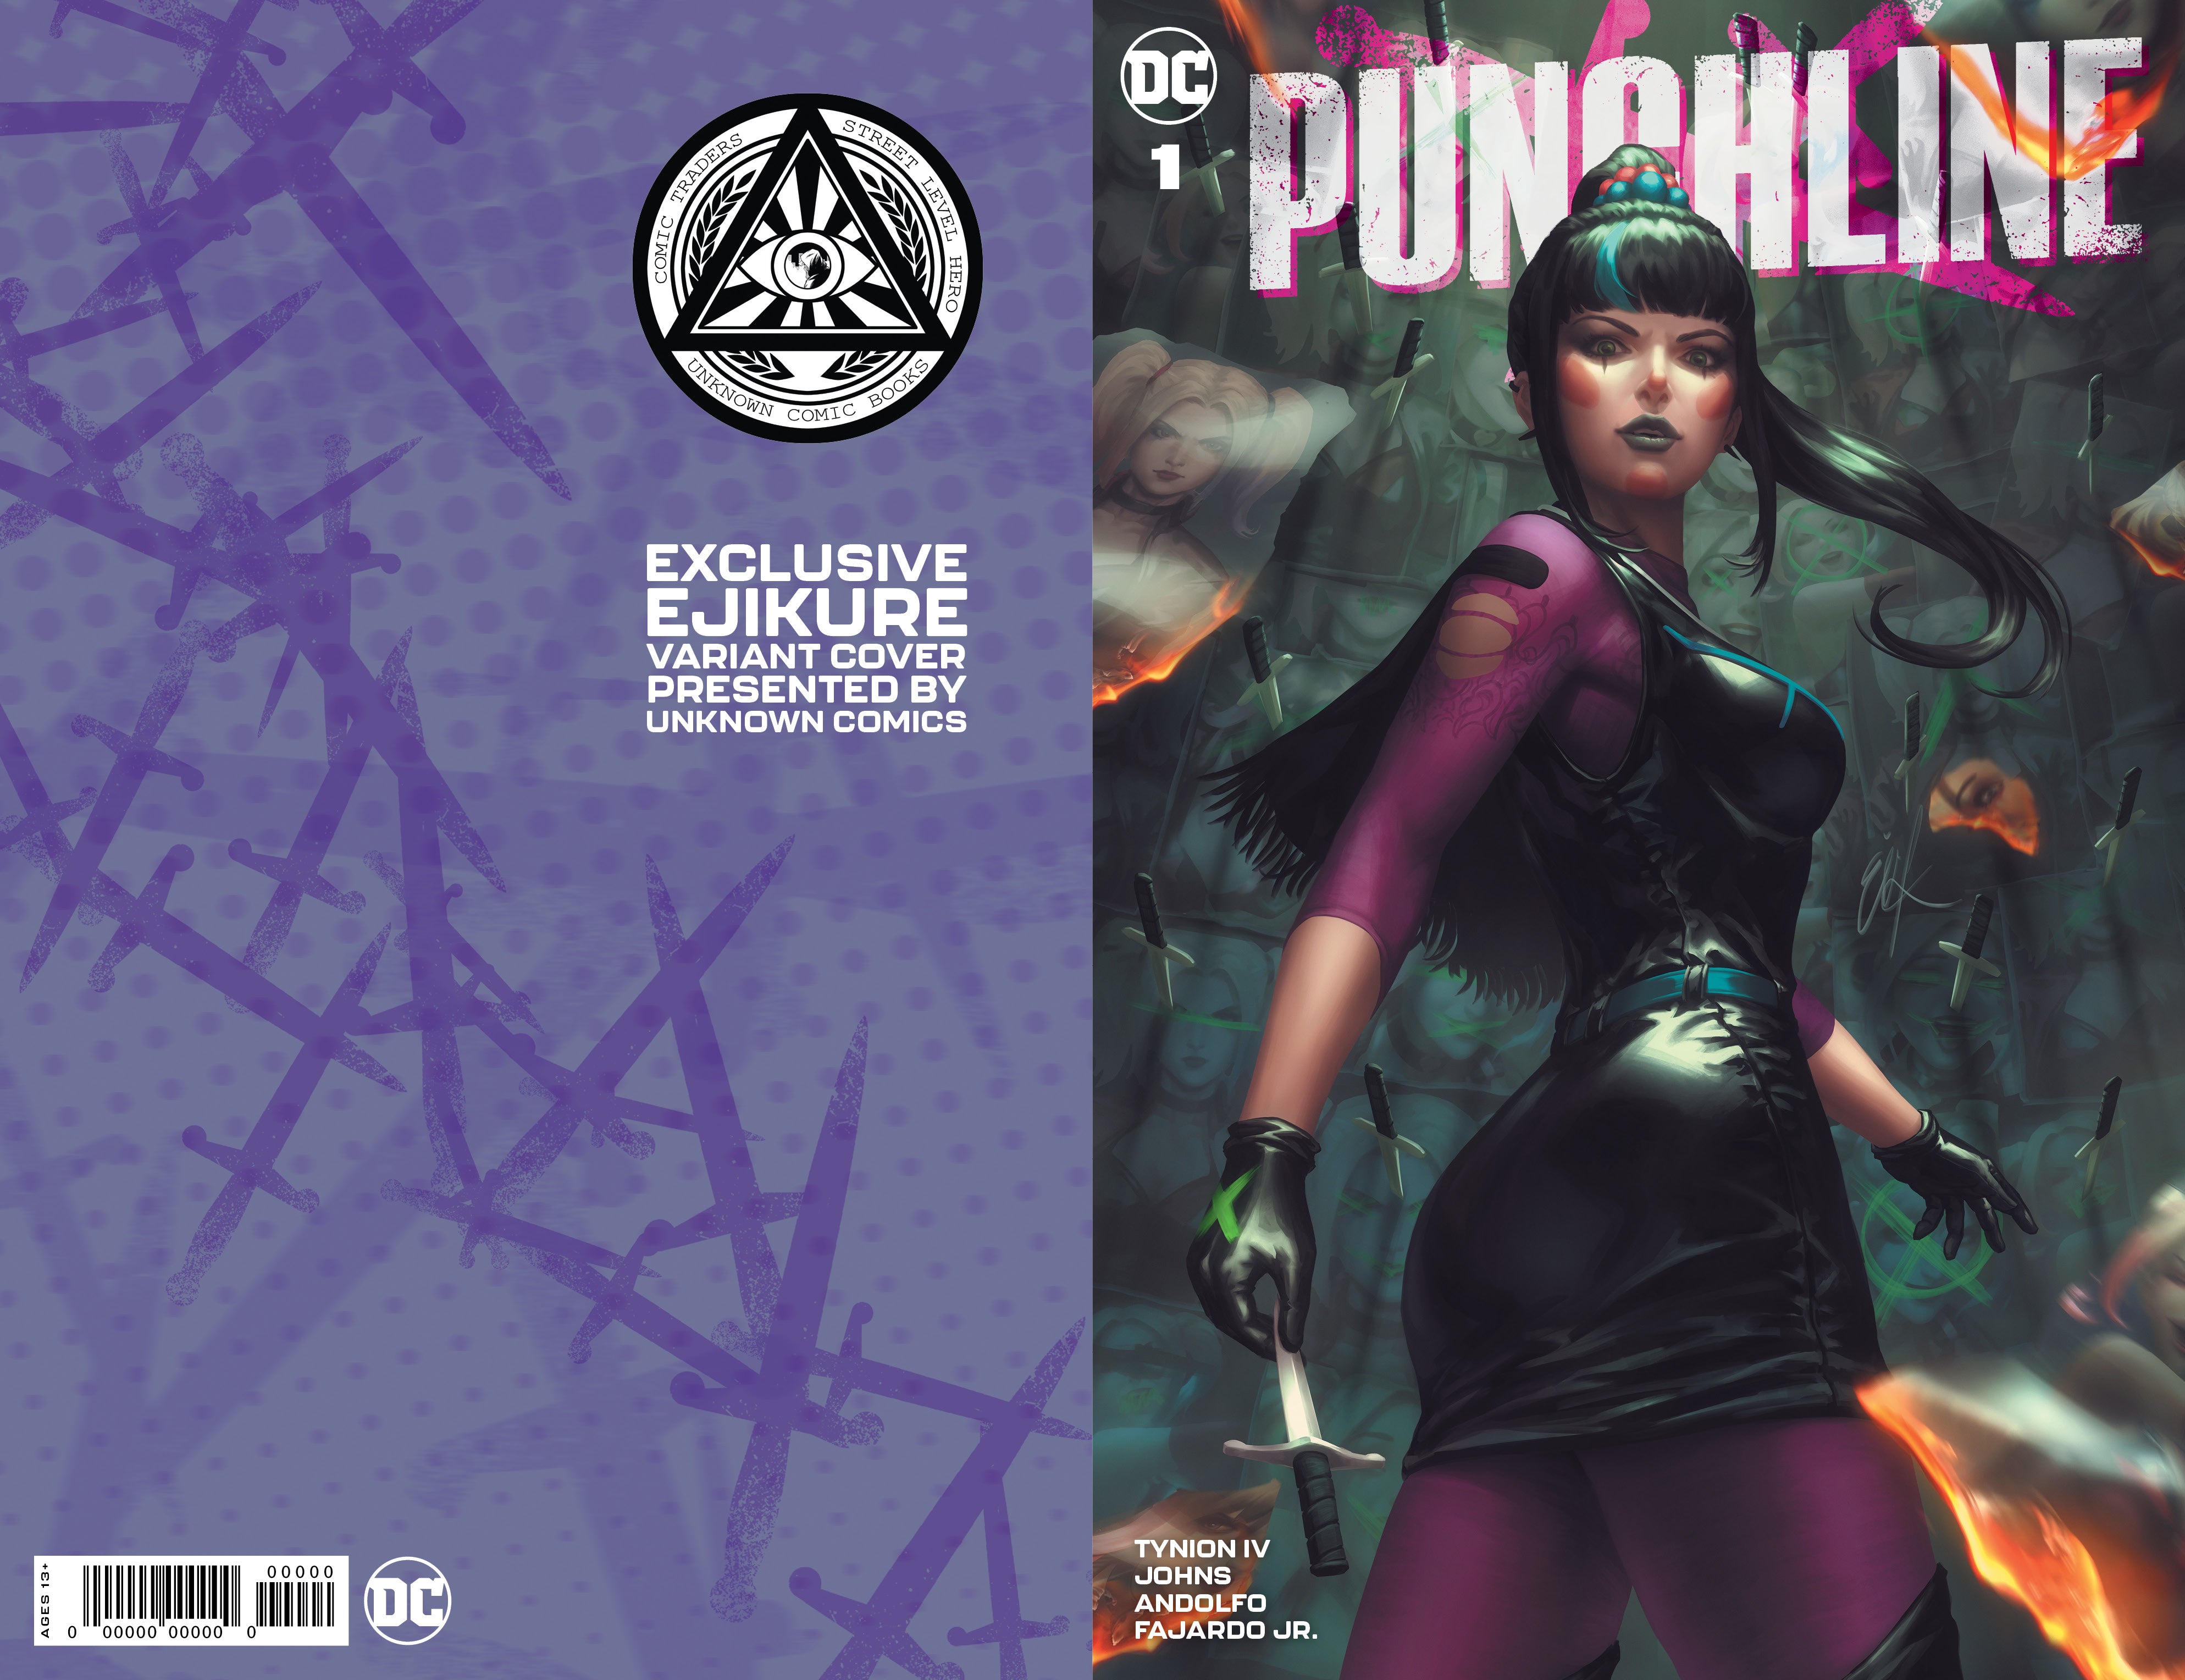 PUNCHLINE SPECIAL #1 (ONE SHOT) UNKNOWN COMICS EJIKURE EXCLUSIVE VAR (11/10/2020)